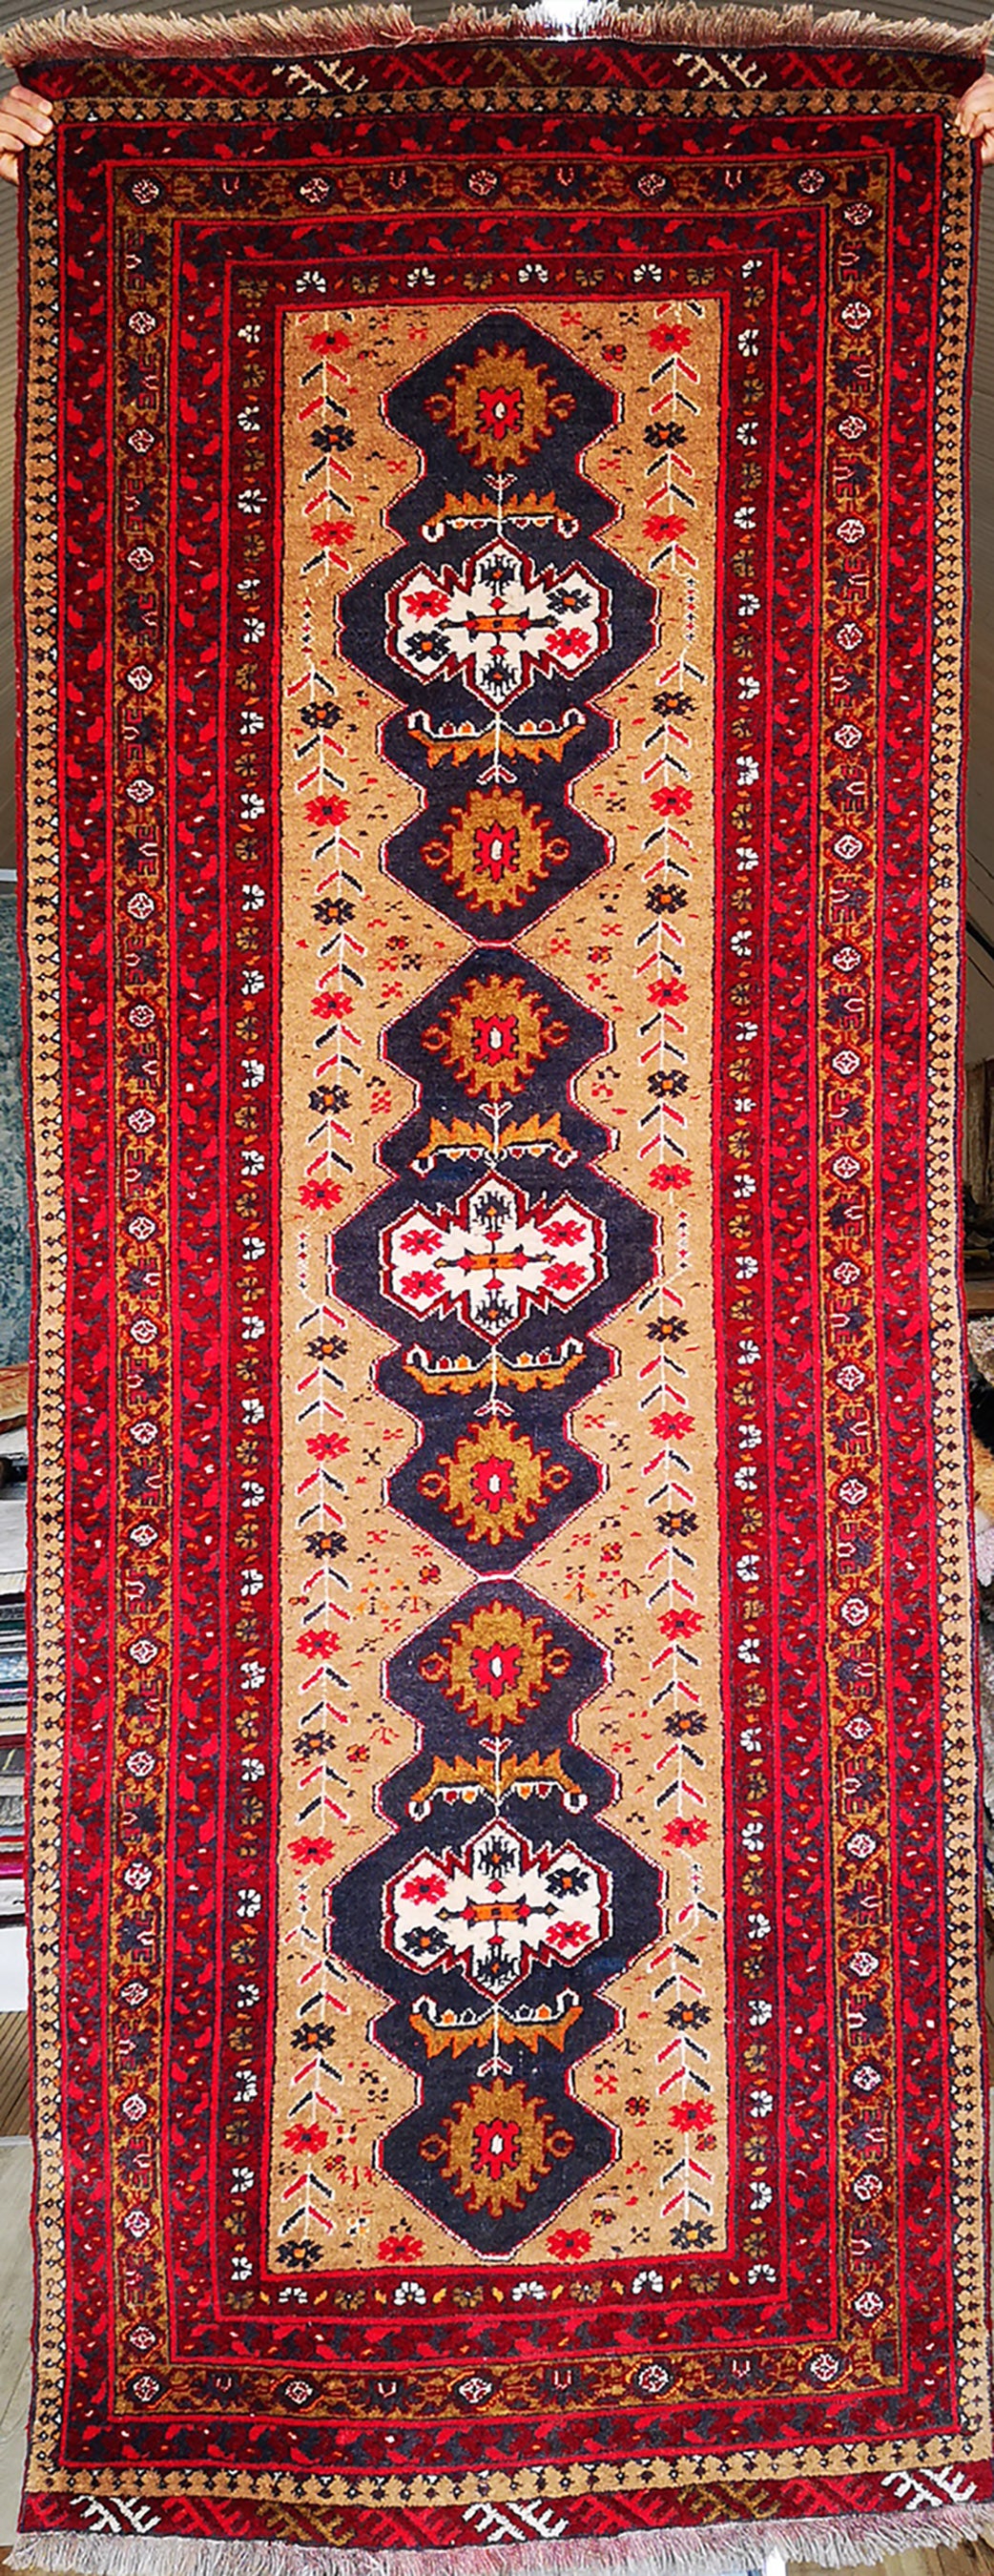 Hand-Knotted Semi-Antique Afghan Baluch Rug Ref: 2777 266 x 115cm –  Little-Persia